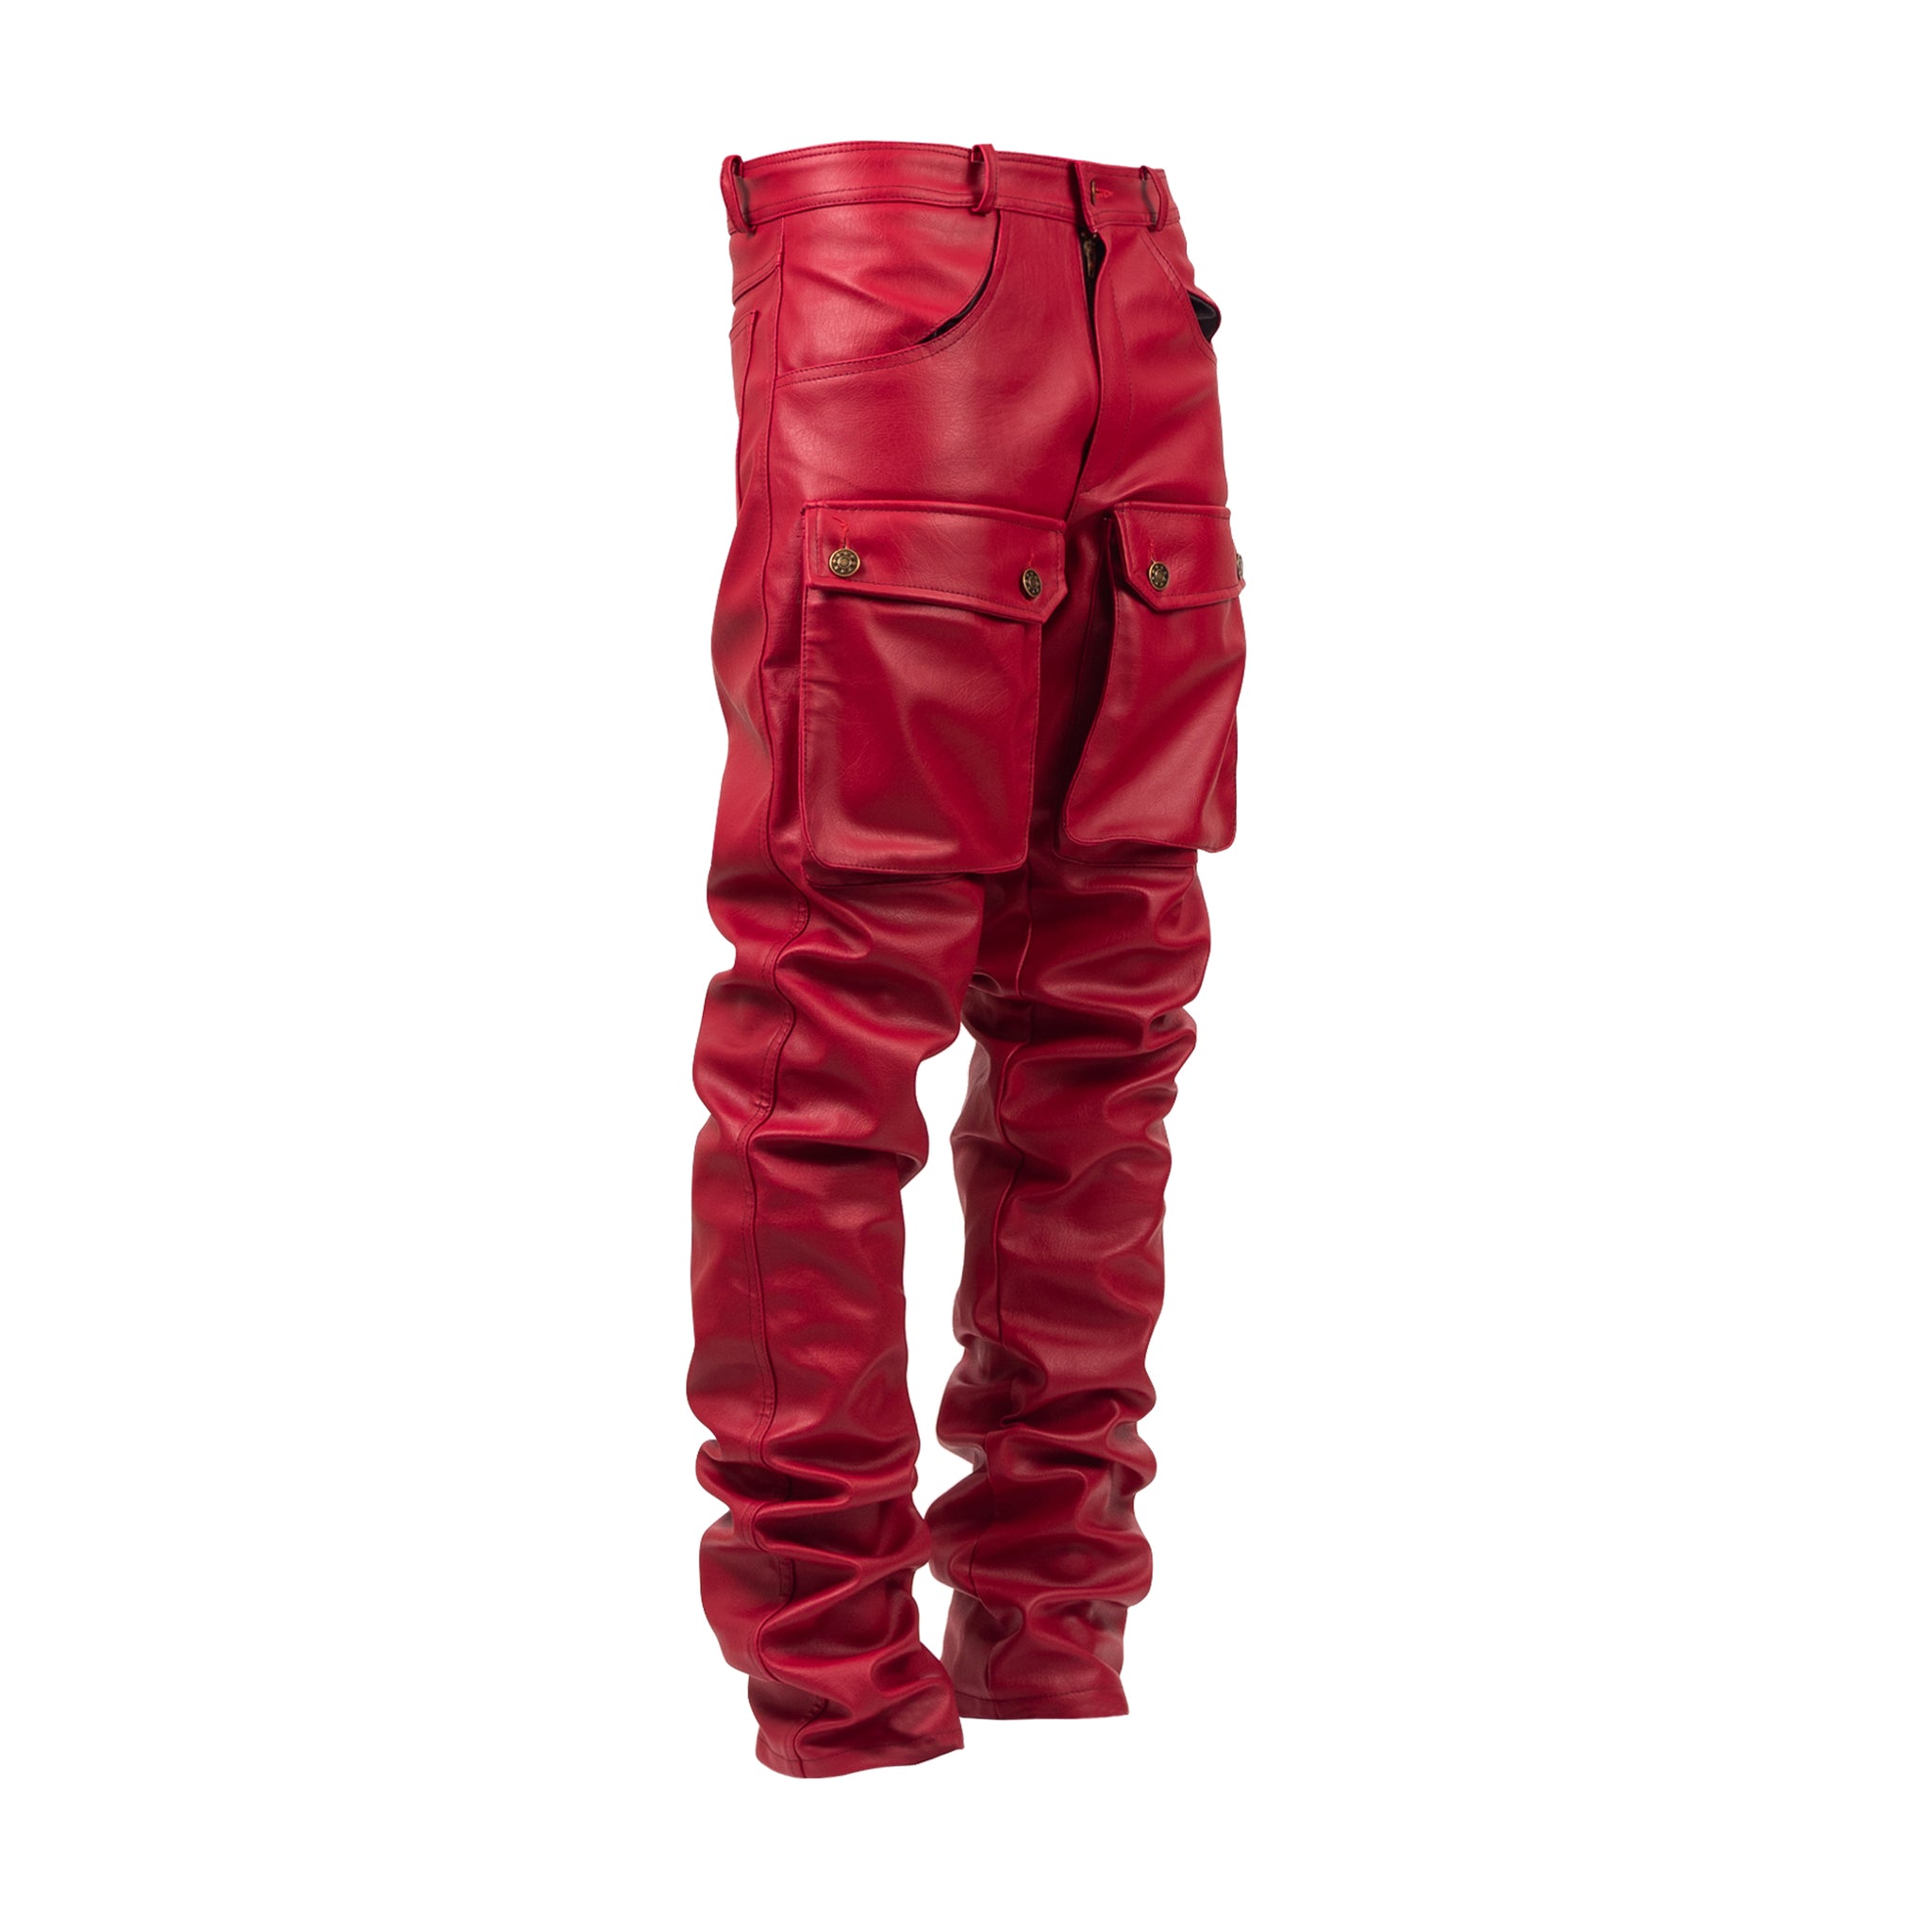 Red leather cargo pants – Soon Enough